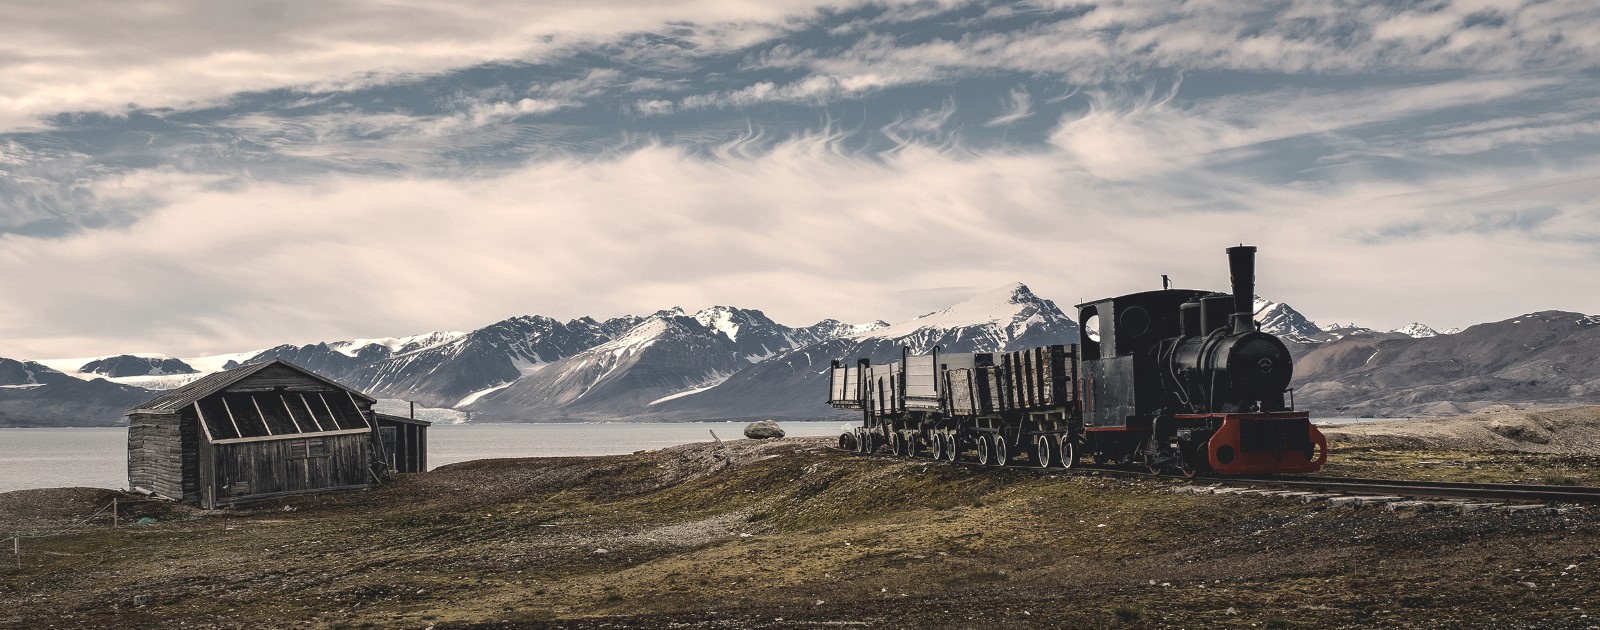 svalbard express excursions